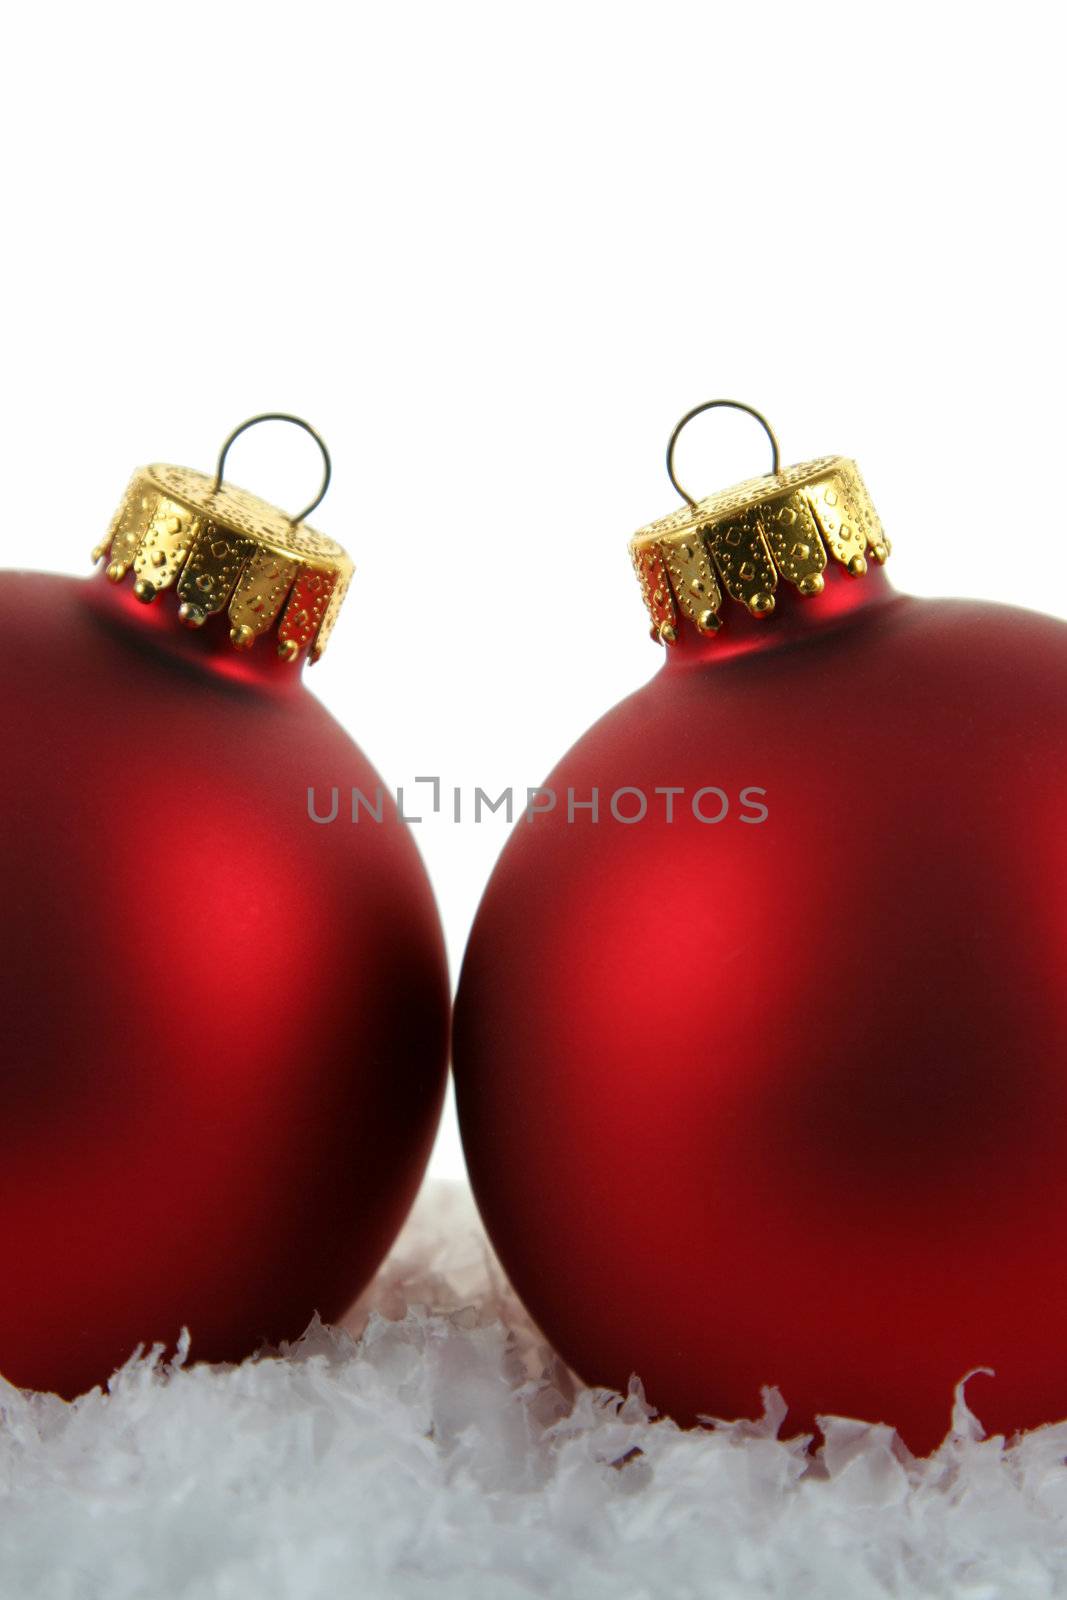 Two red Christmas bauble backed by a white background.
